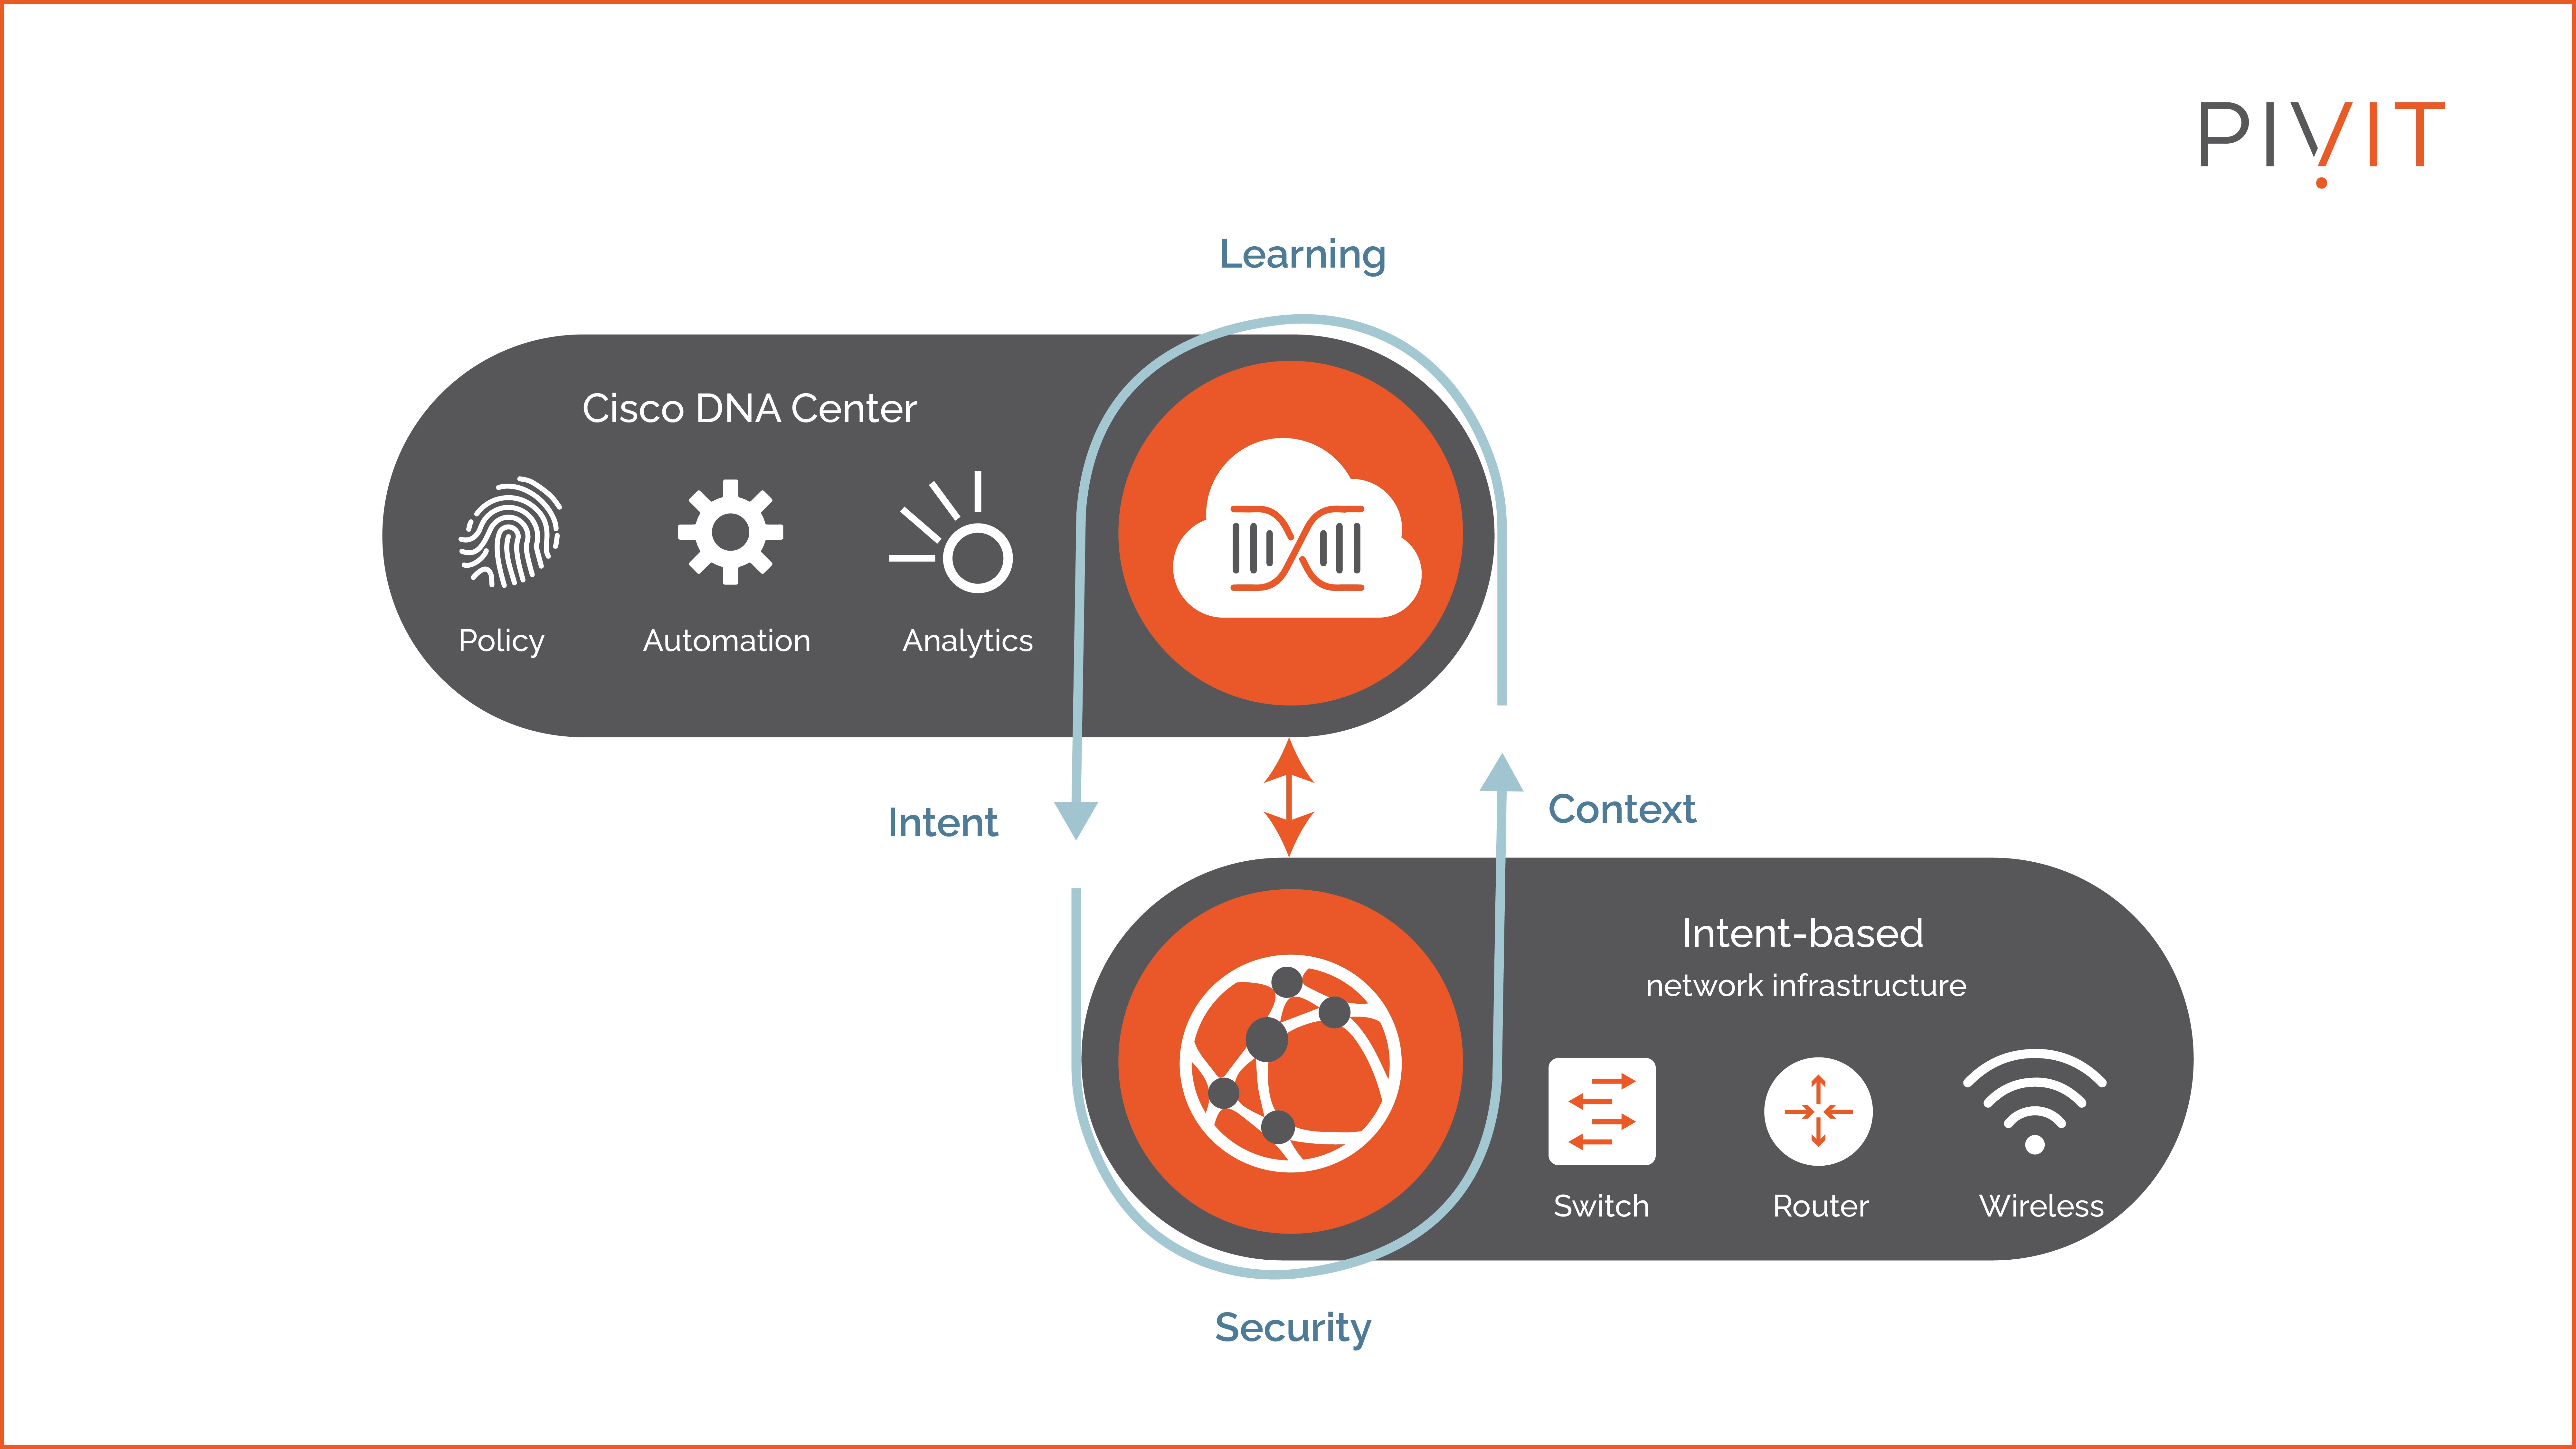 Cisco DNA and intent-based network infrastructure